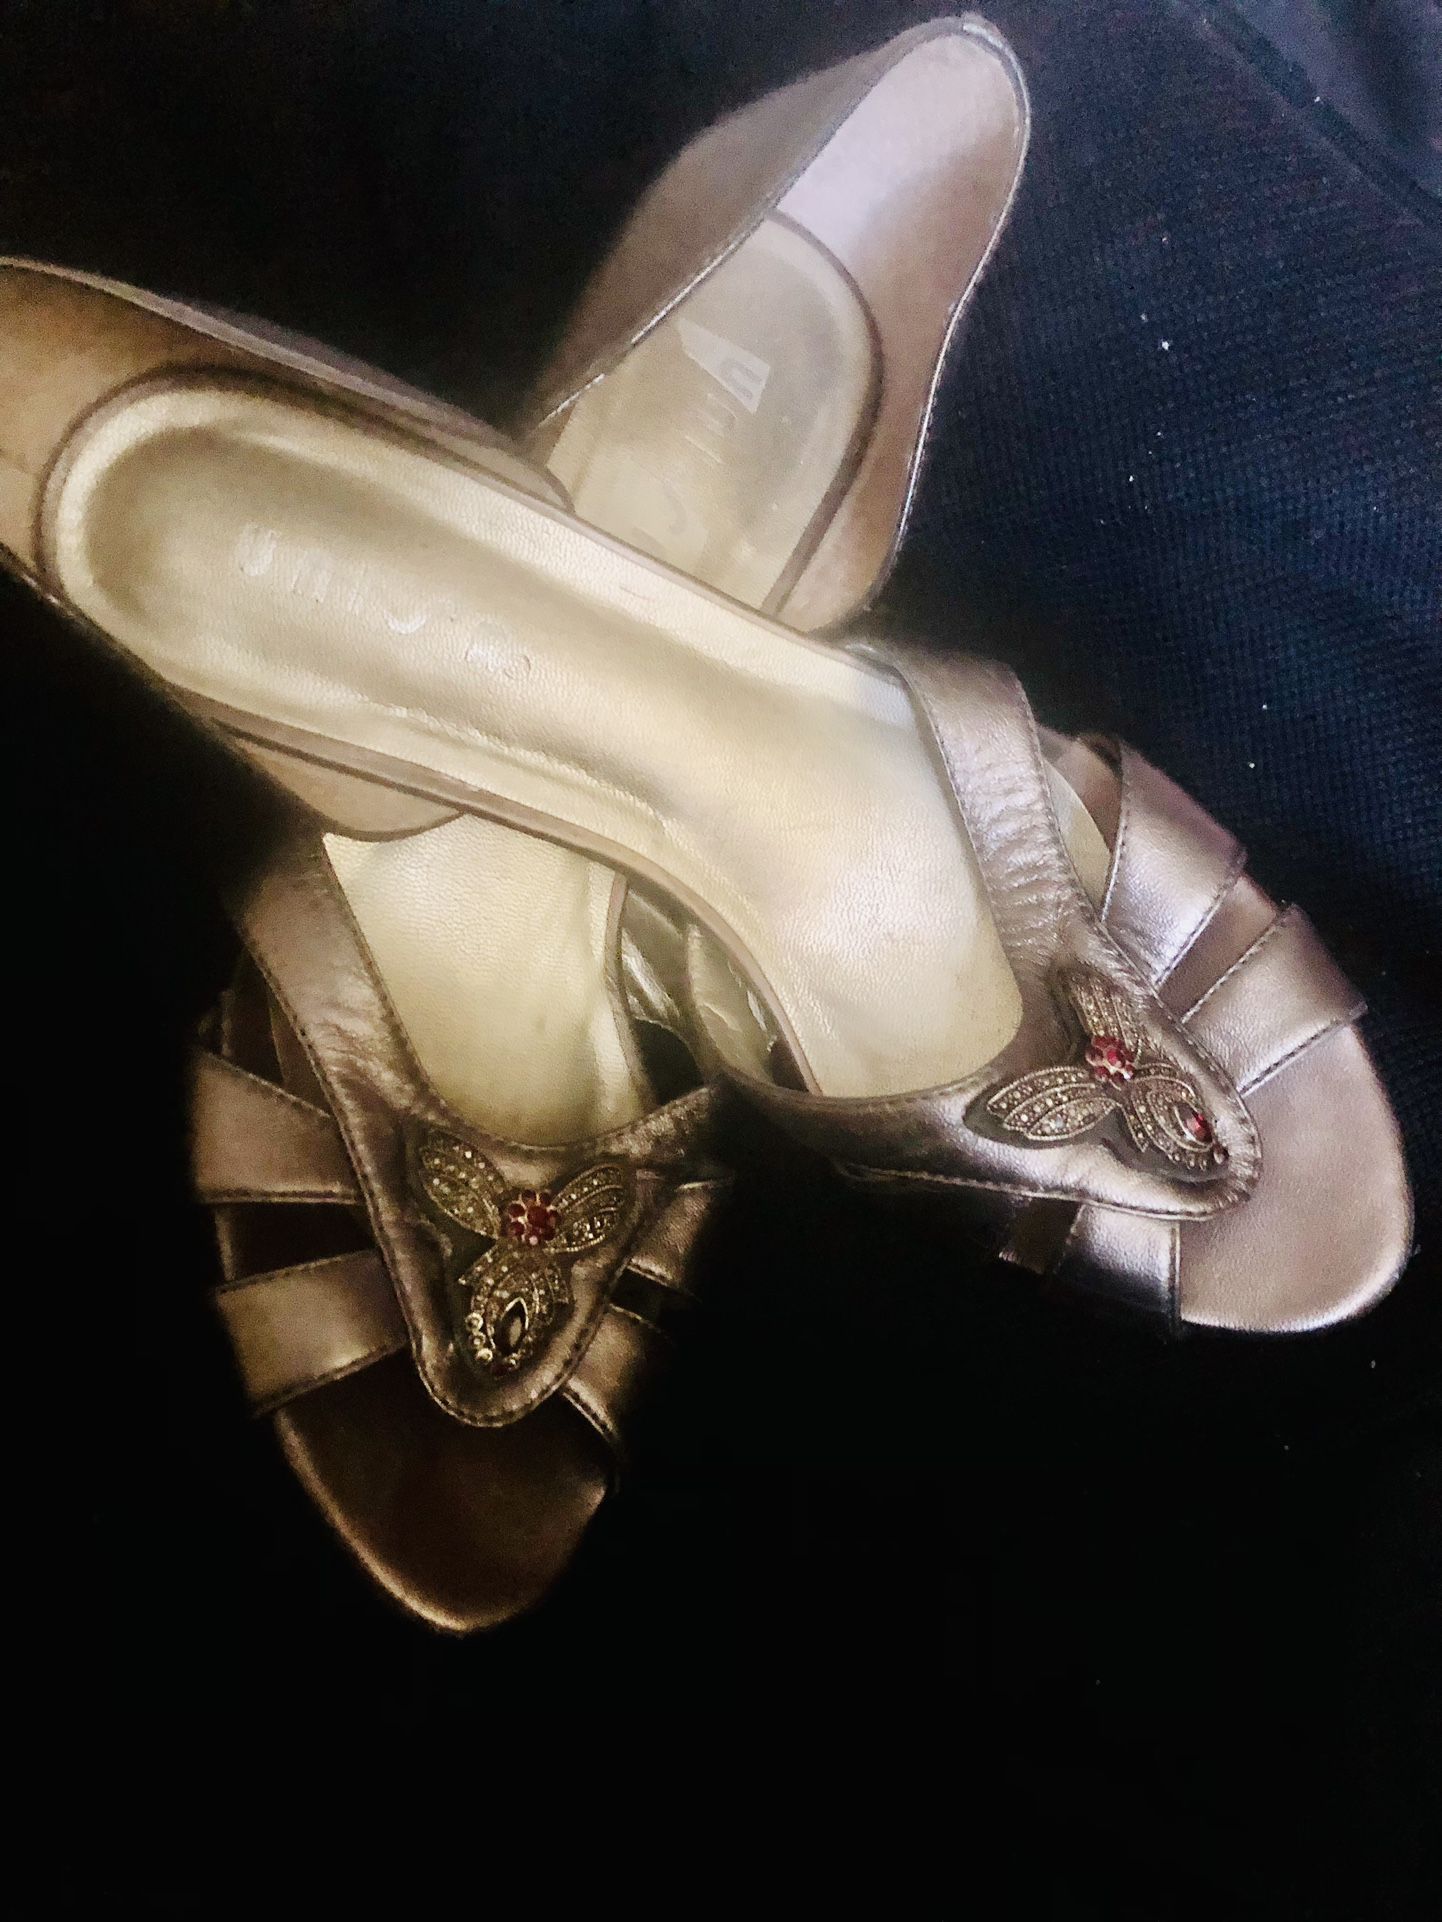 Unisa 4” Heels. Dramatic Jewel Insect On Each. Some Wear